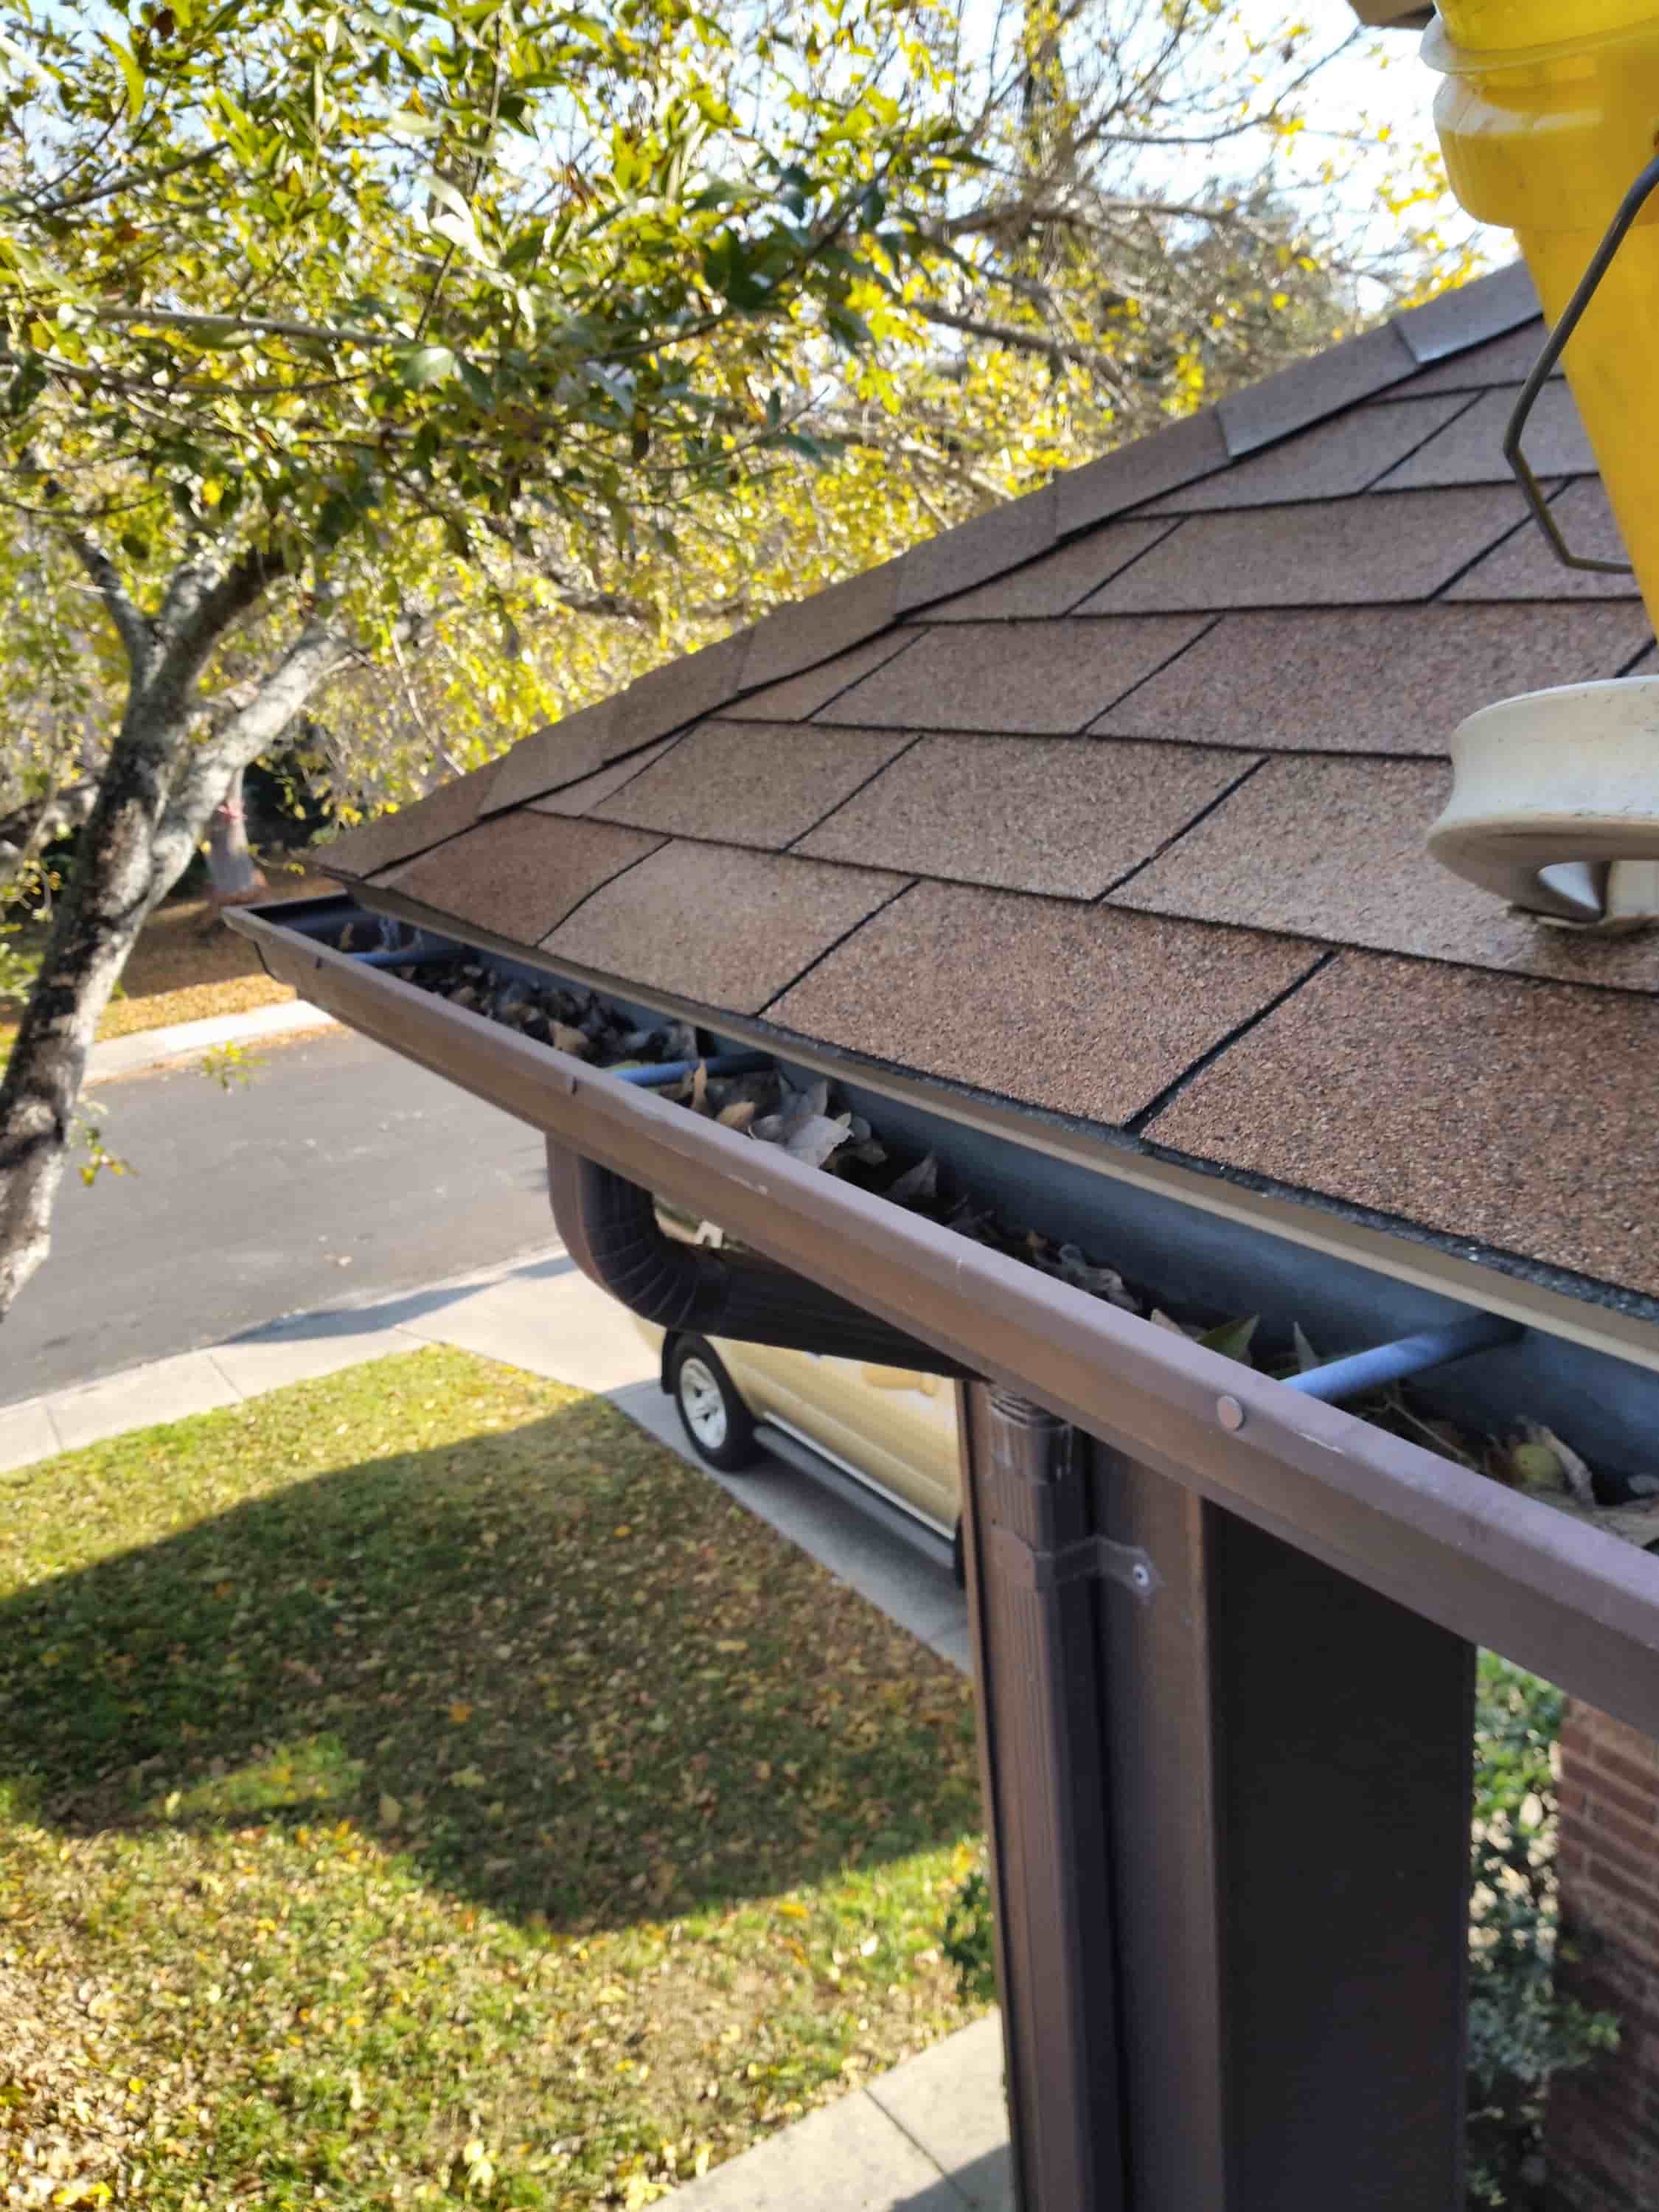 gutter cleaning costs average